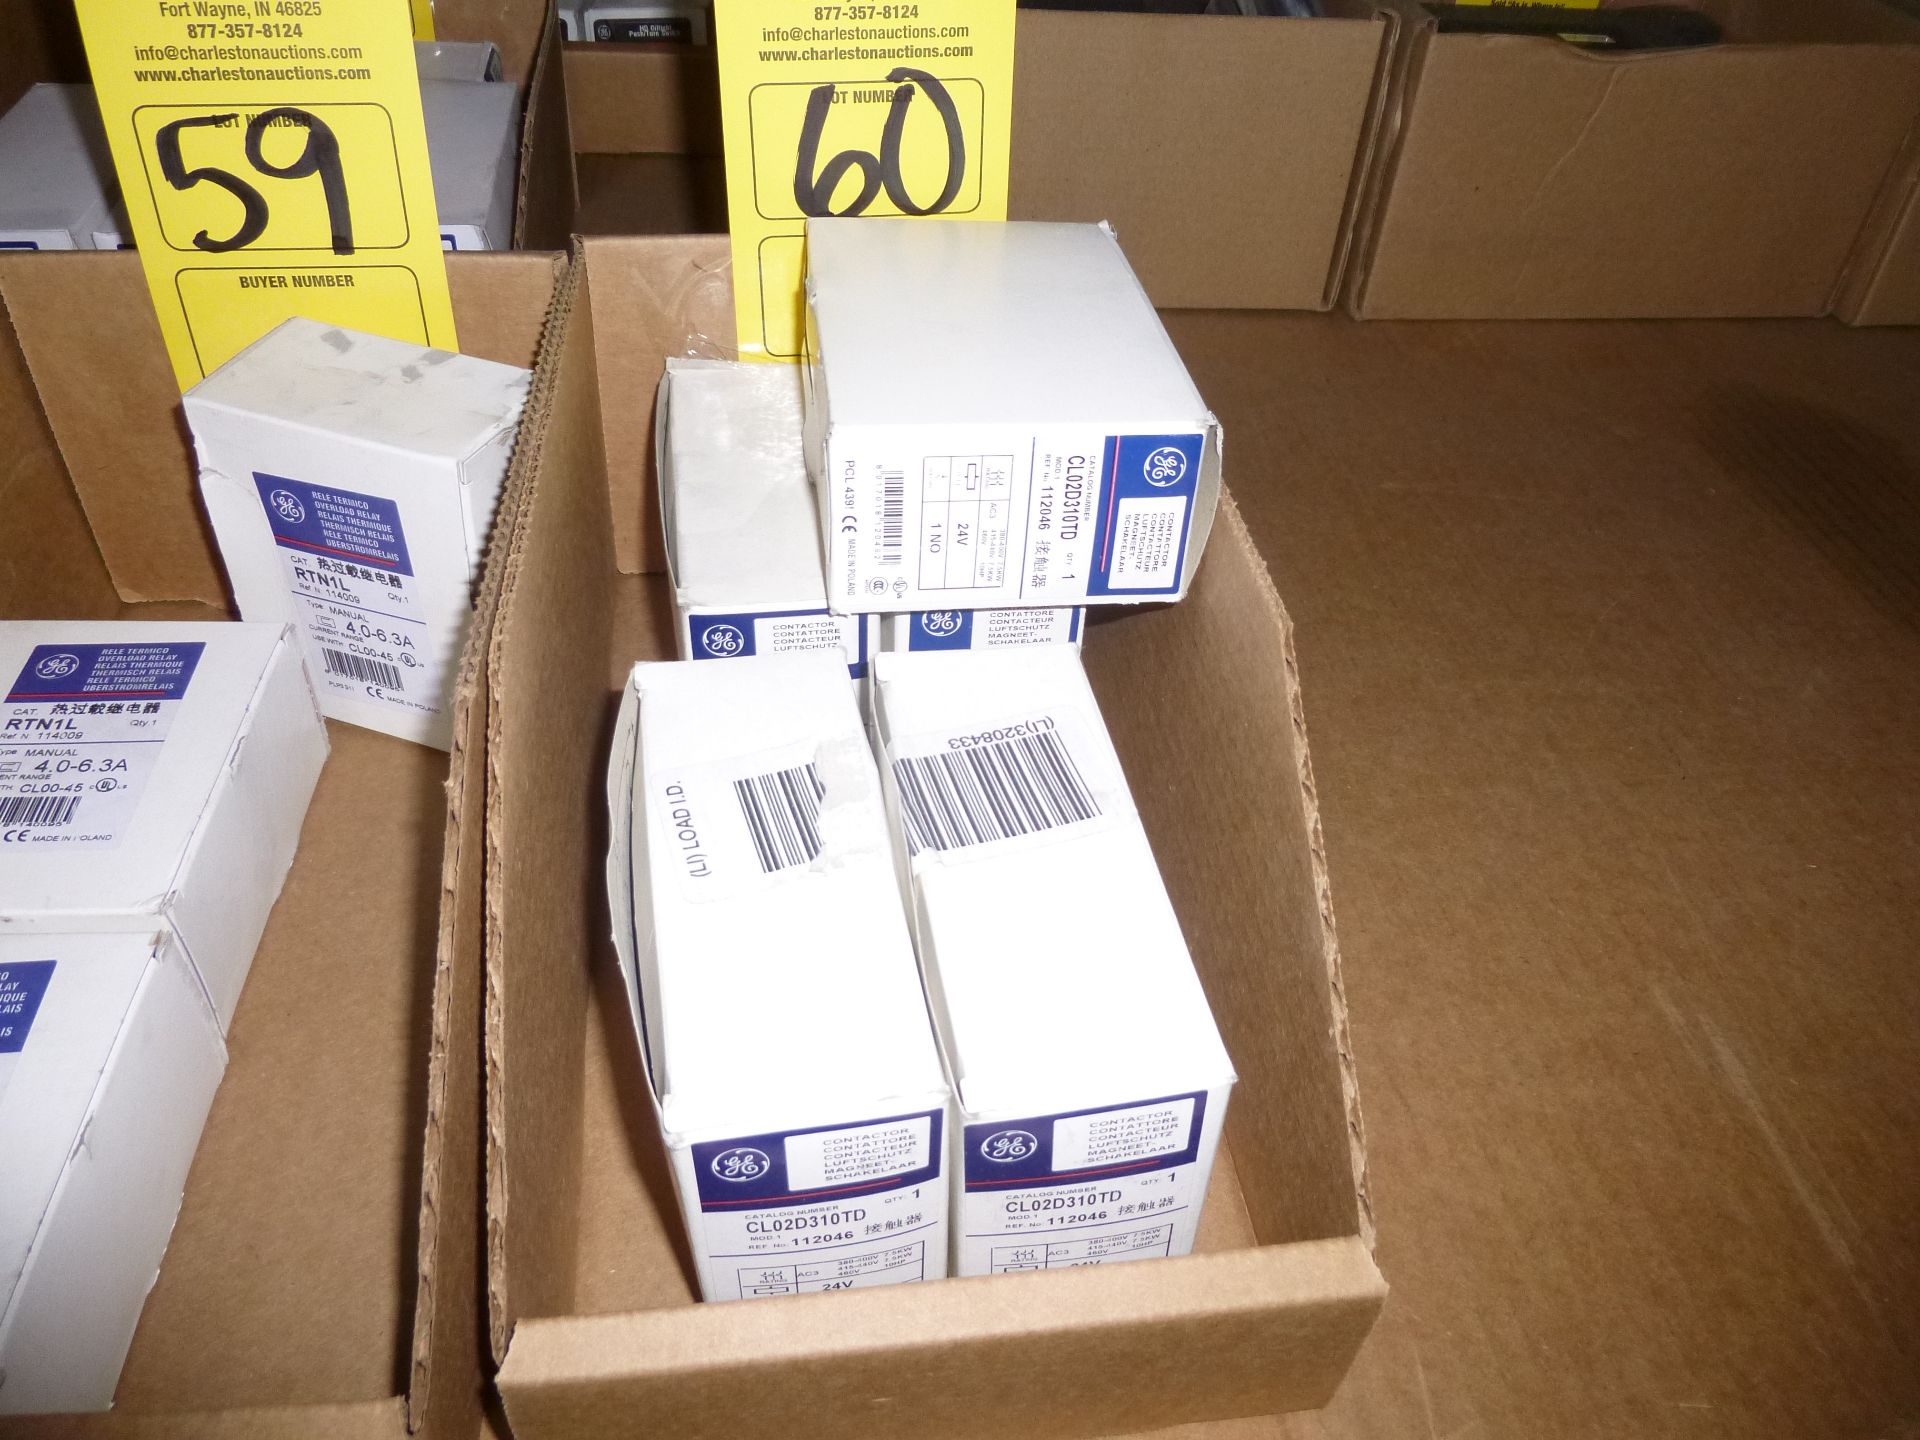 Qty 5 GE contactor CL02D310TD, new in boxes, as always with Brolyn LLC auctions, all lots can be